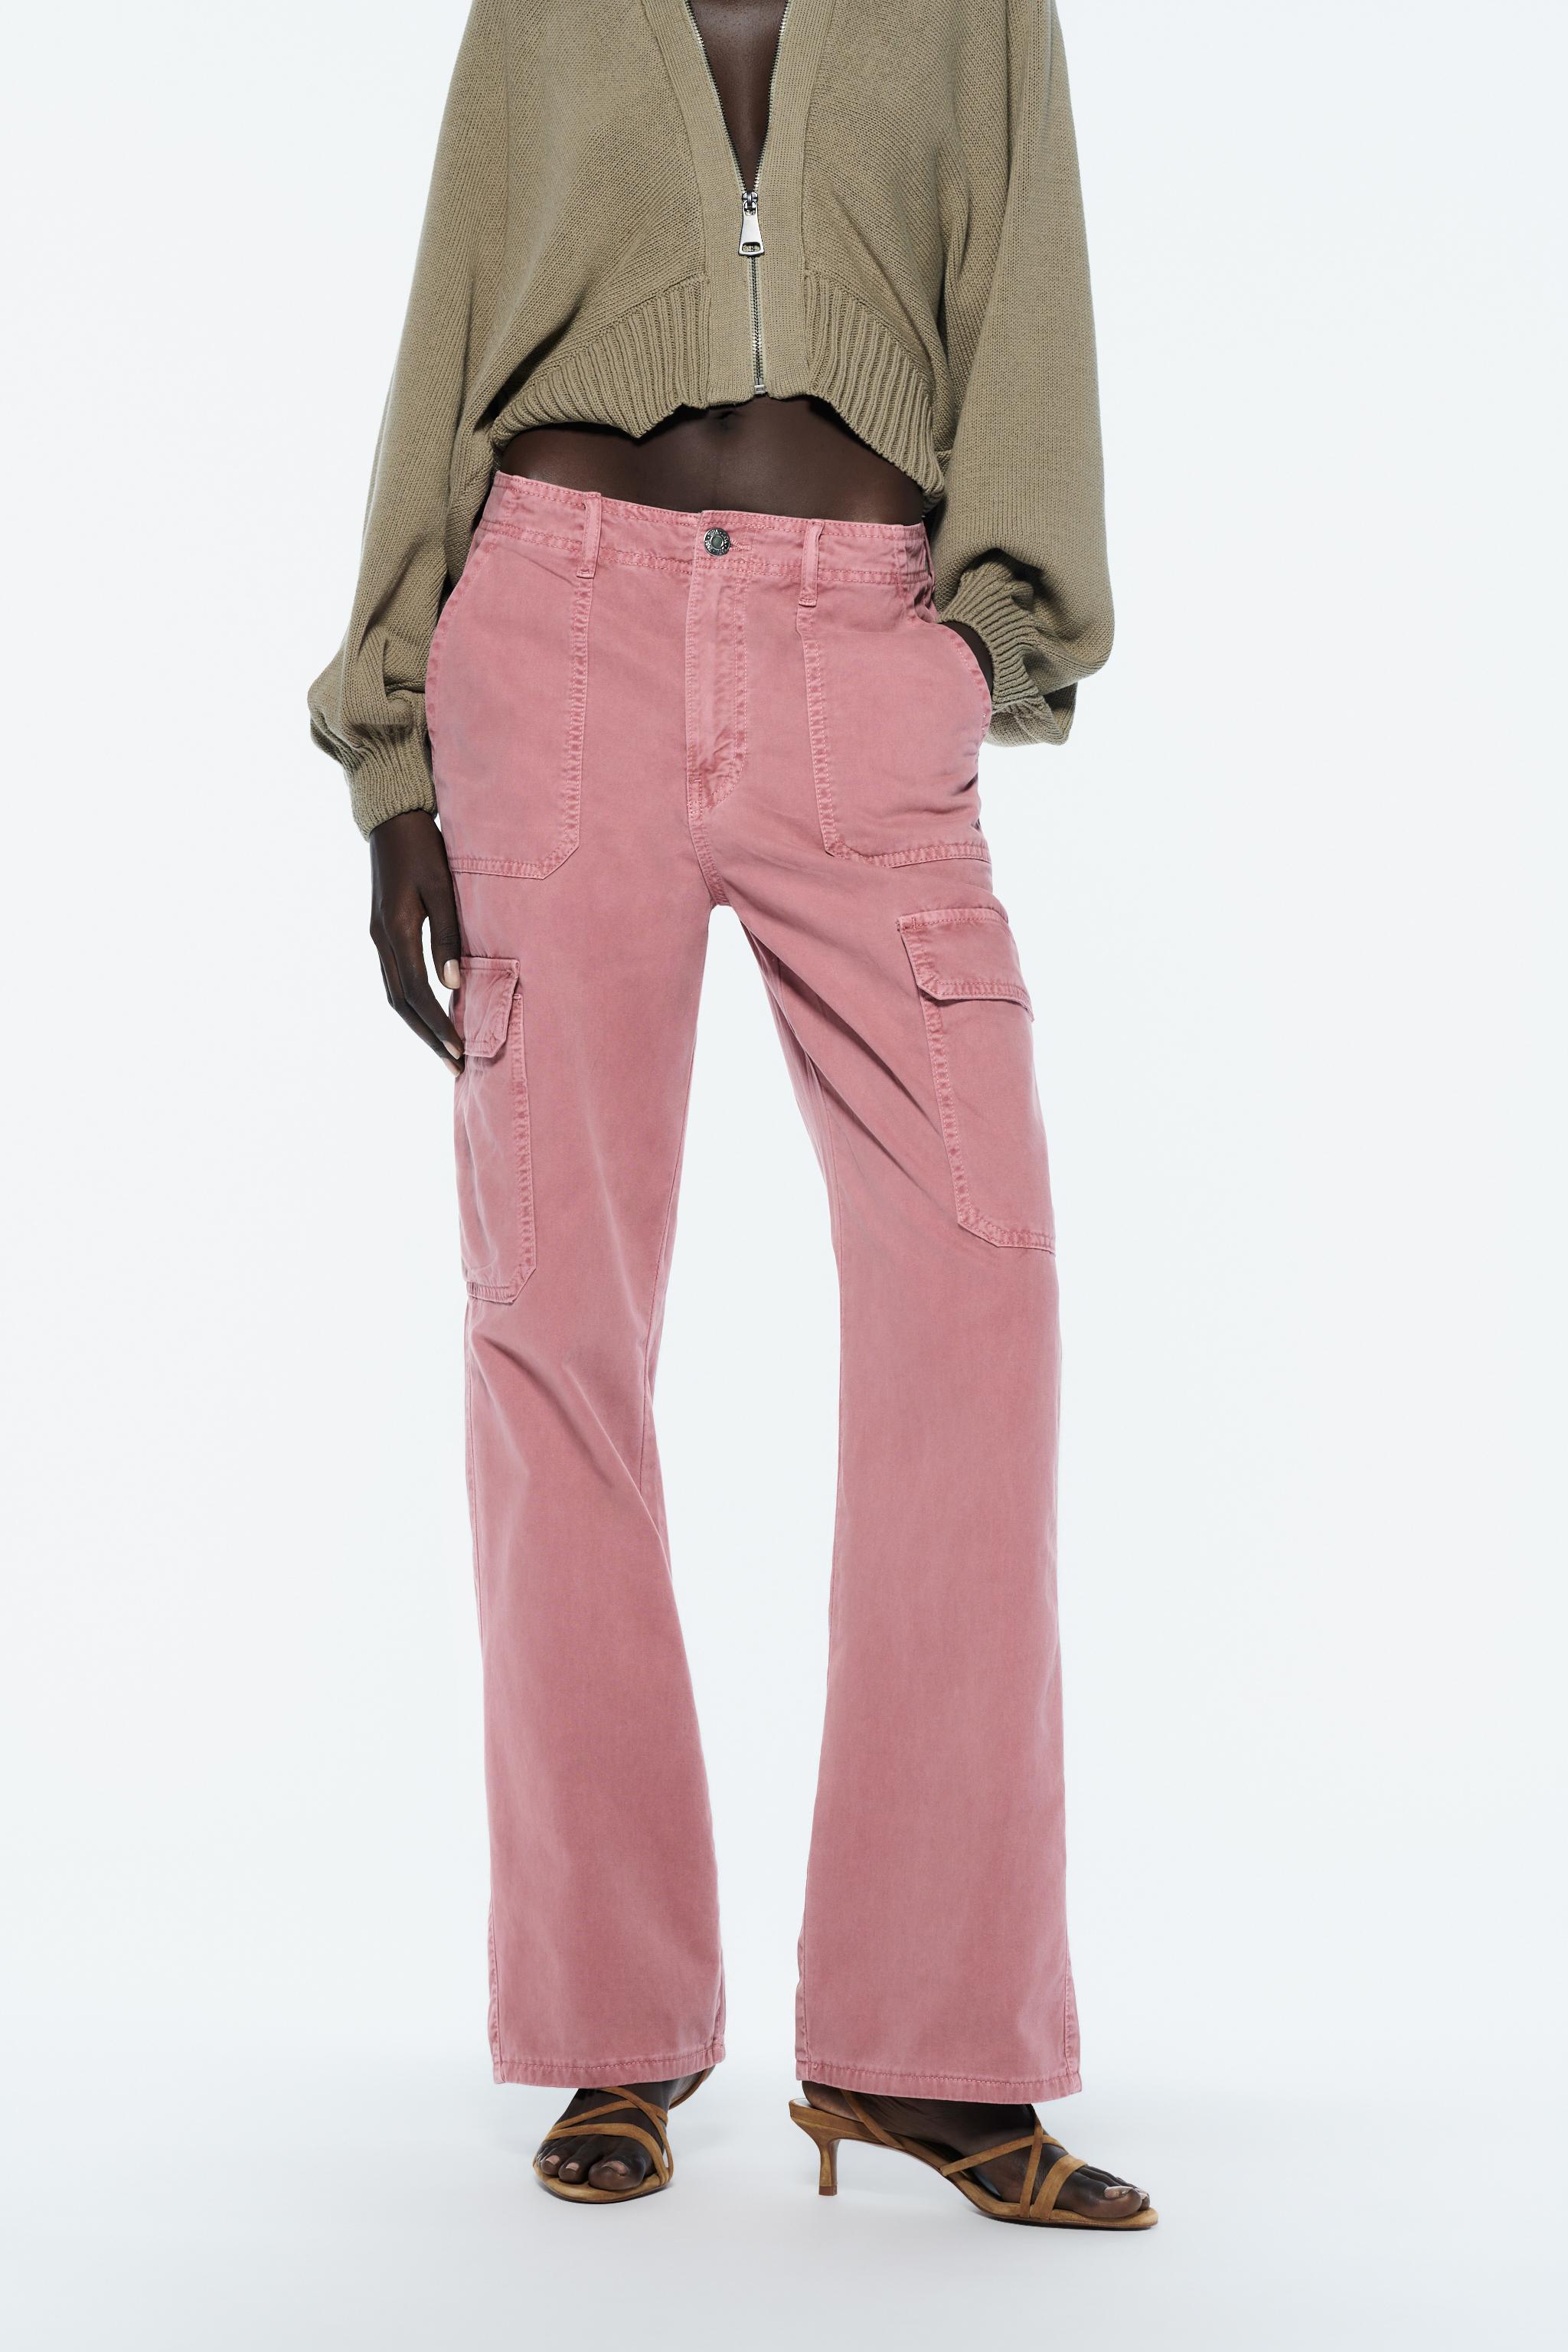 Pink wide leg pants, ERRE, Made in South Africa